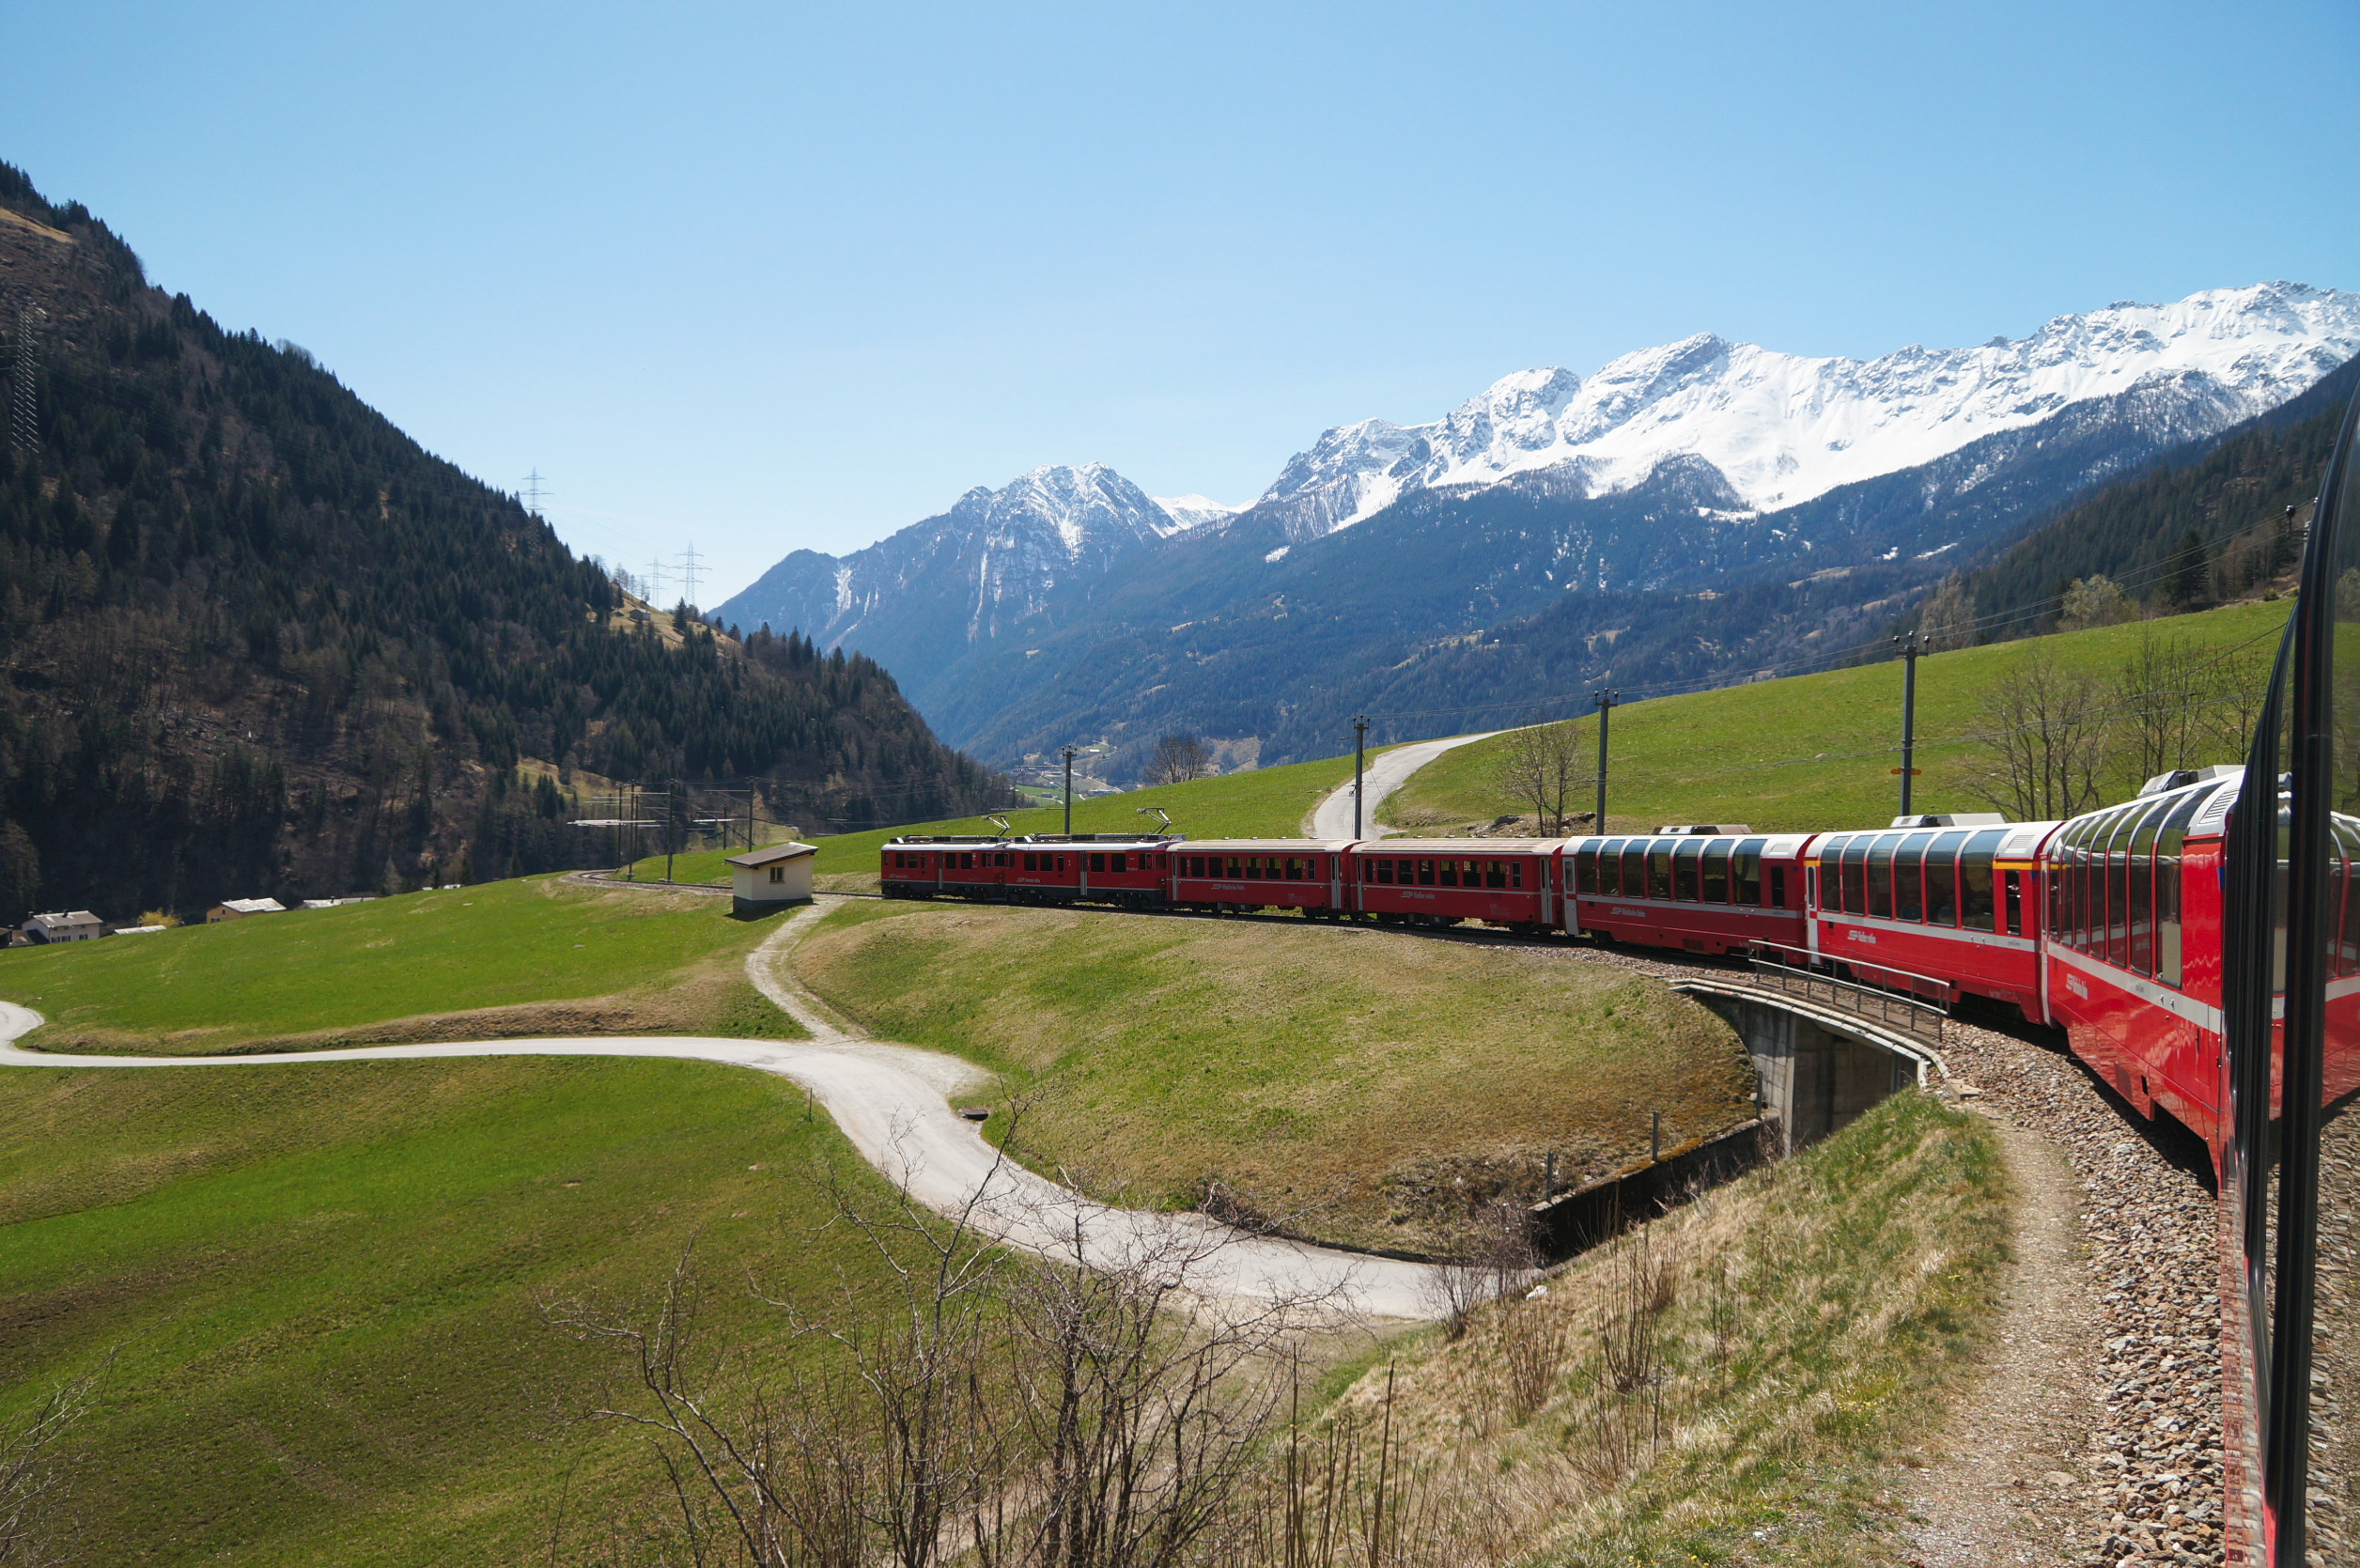 <p>Crossing the Alps from Switzerland to Italy, the Bernina Express is a feast for the eyes. Perhaps it’s one of the reasons <a href="https://www.businessinsider.com/why-traveling-by-train-is-the-best-mode-of-transportation-2023-9">people still opt to travel by train</a>. This train journey boasts stunning mountain vistas, glaciers, and picturesque villages. Pass over the iconic Landwasser Viaduct, a marvel of engineering that blends seamlessly with the natural landscape. Whether you opt for panoramic coaches or open-air carriages, the Bernina Express guarantees a front-row seat to nature’s most spectacular show. The Bernina Express also crosses the Bernina Pass, the highest railway crossing in the Alps, offering unparalleled views.</p>